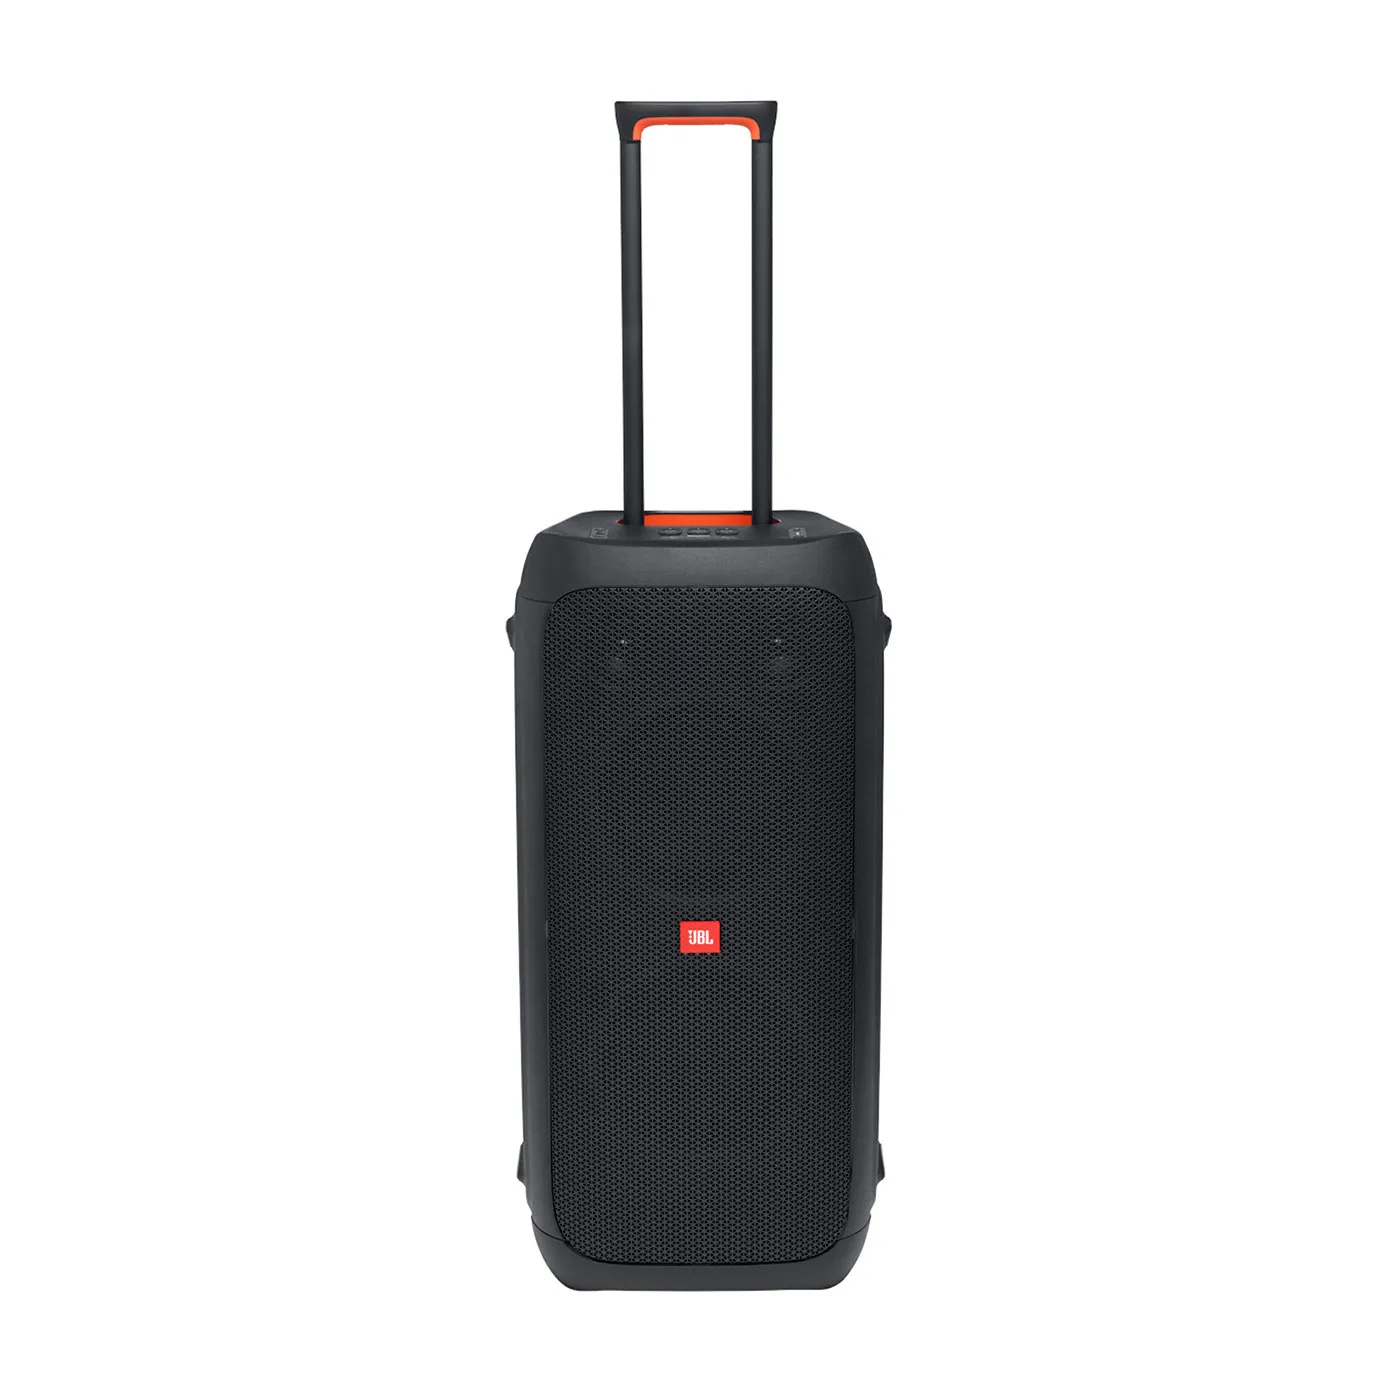 Parlante JBL Partybox 310 Negro